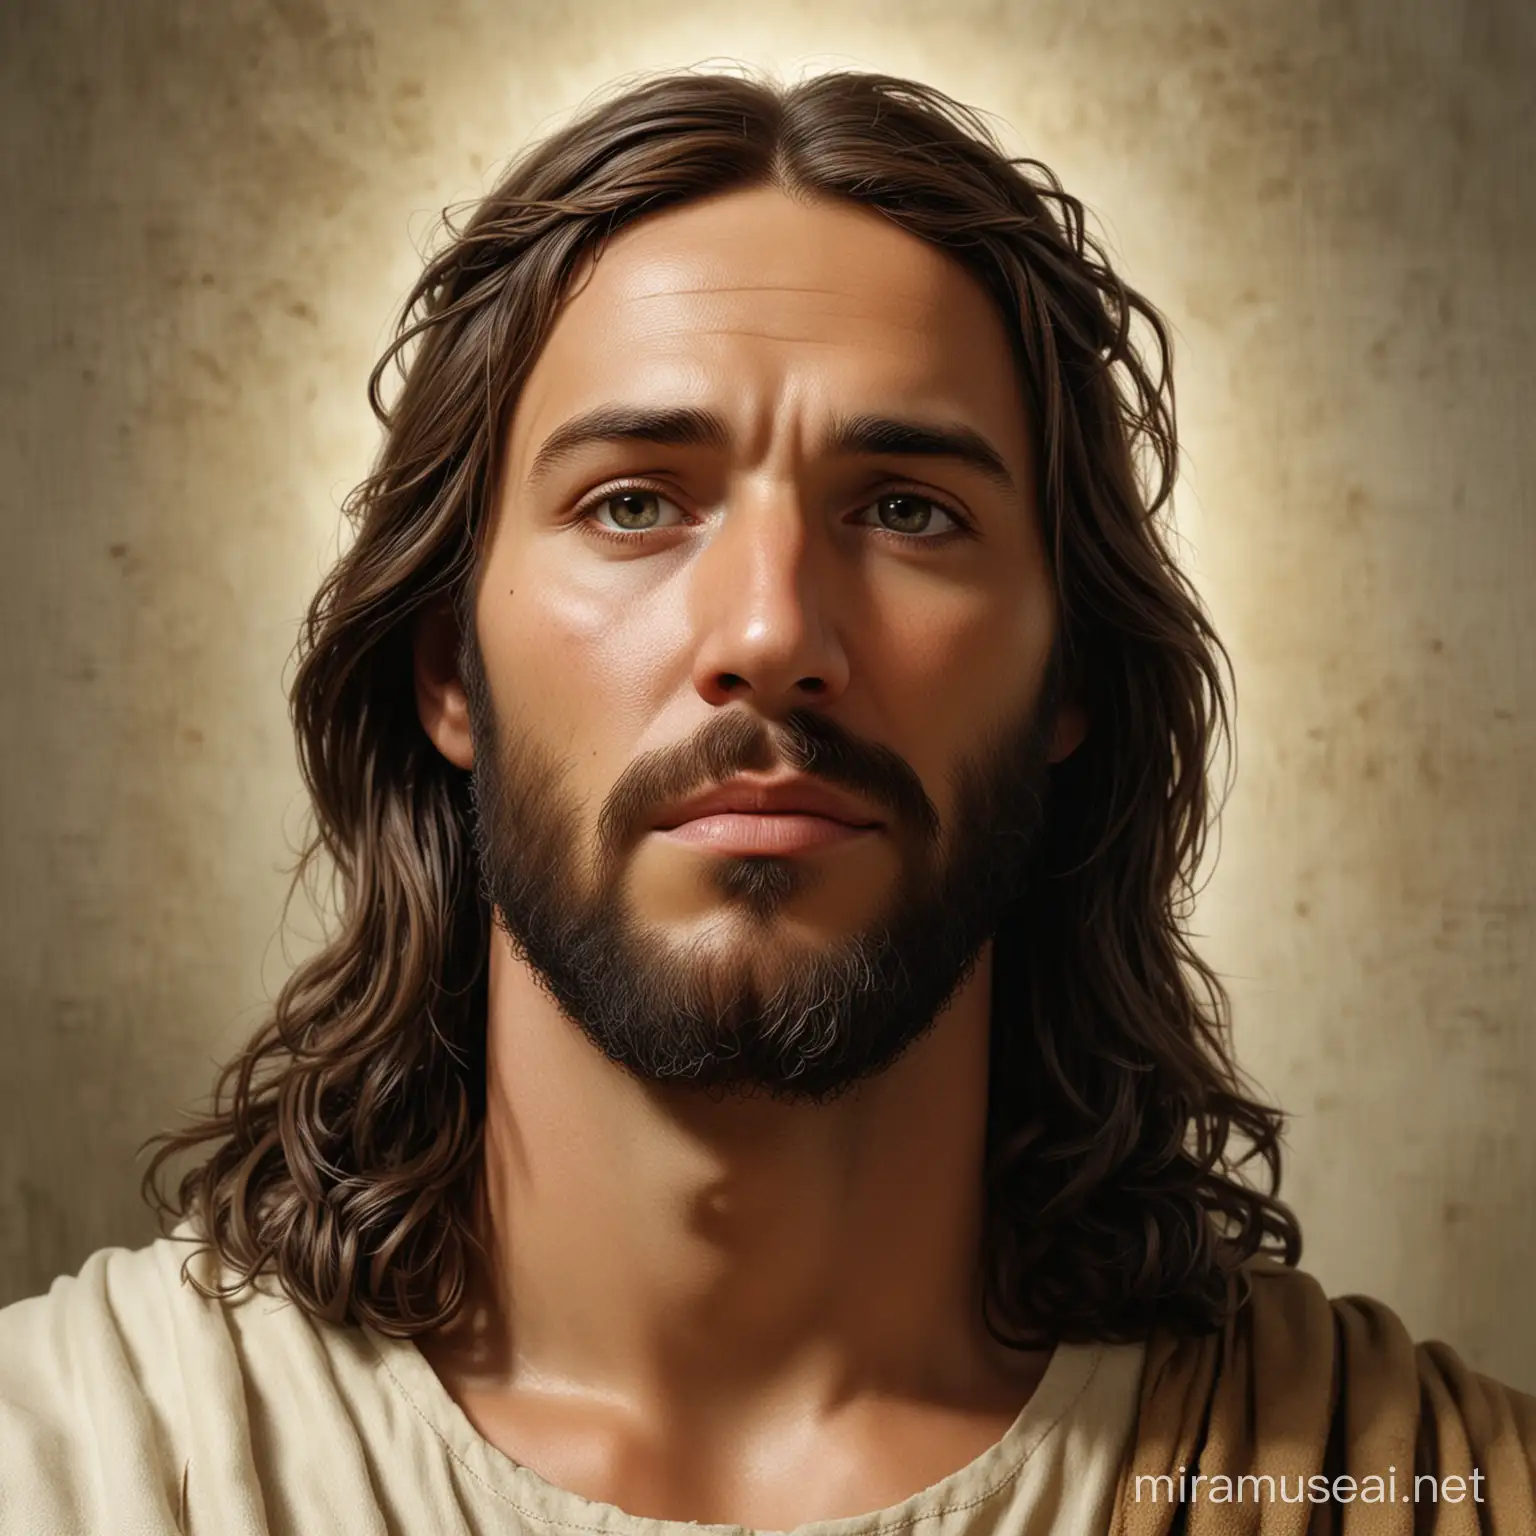 Realistic Portrait of Jesus Christ in Classic Style